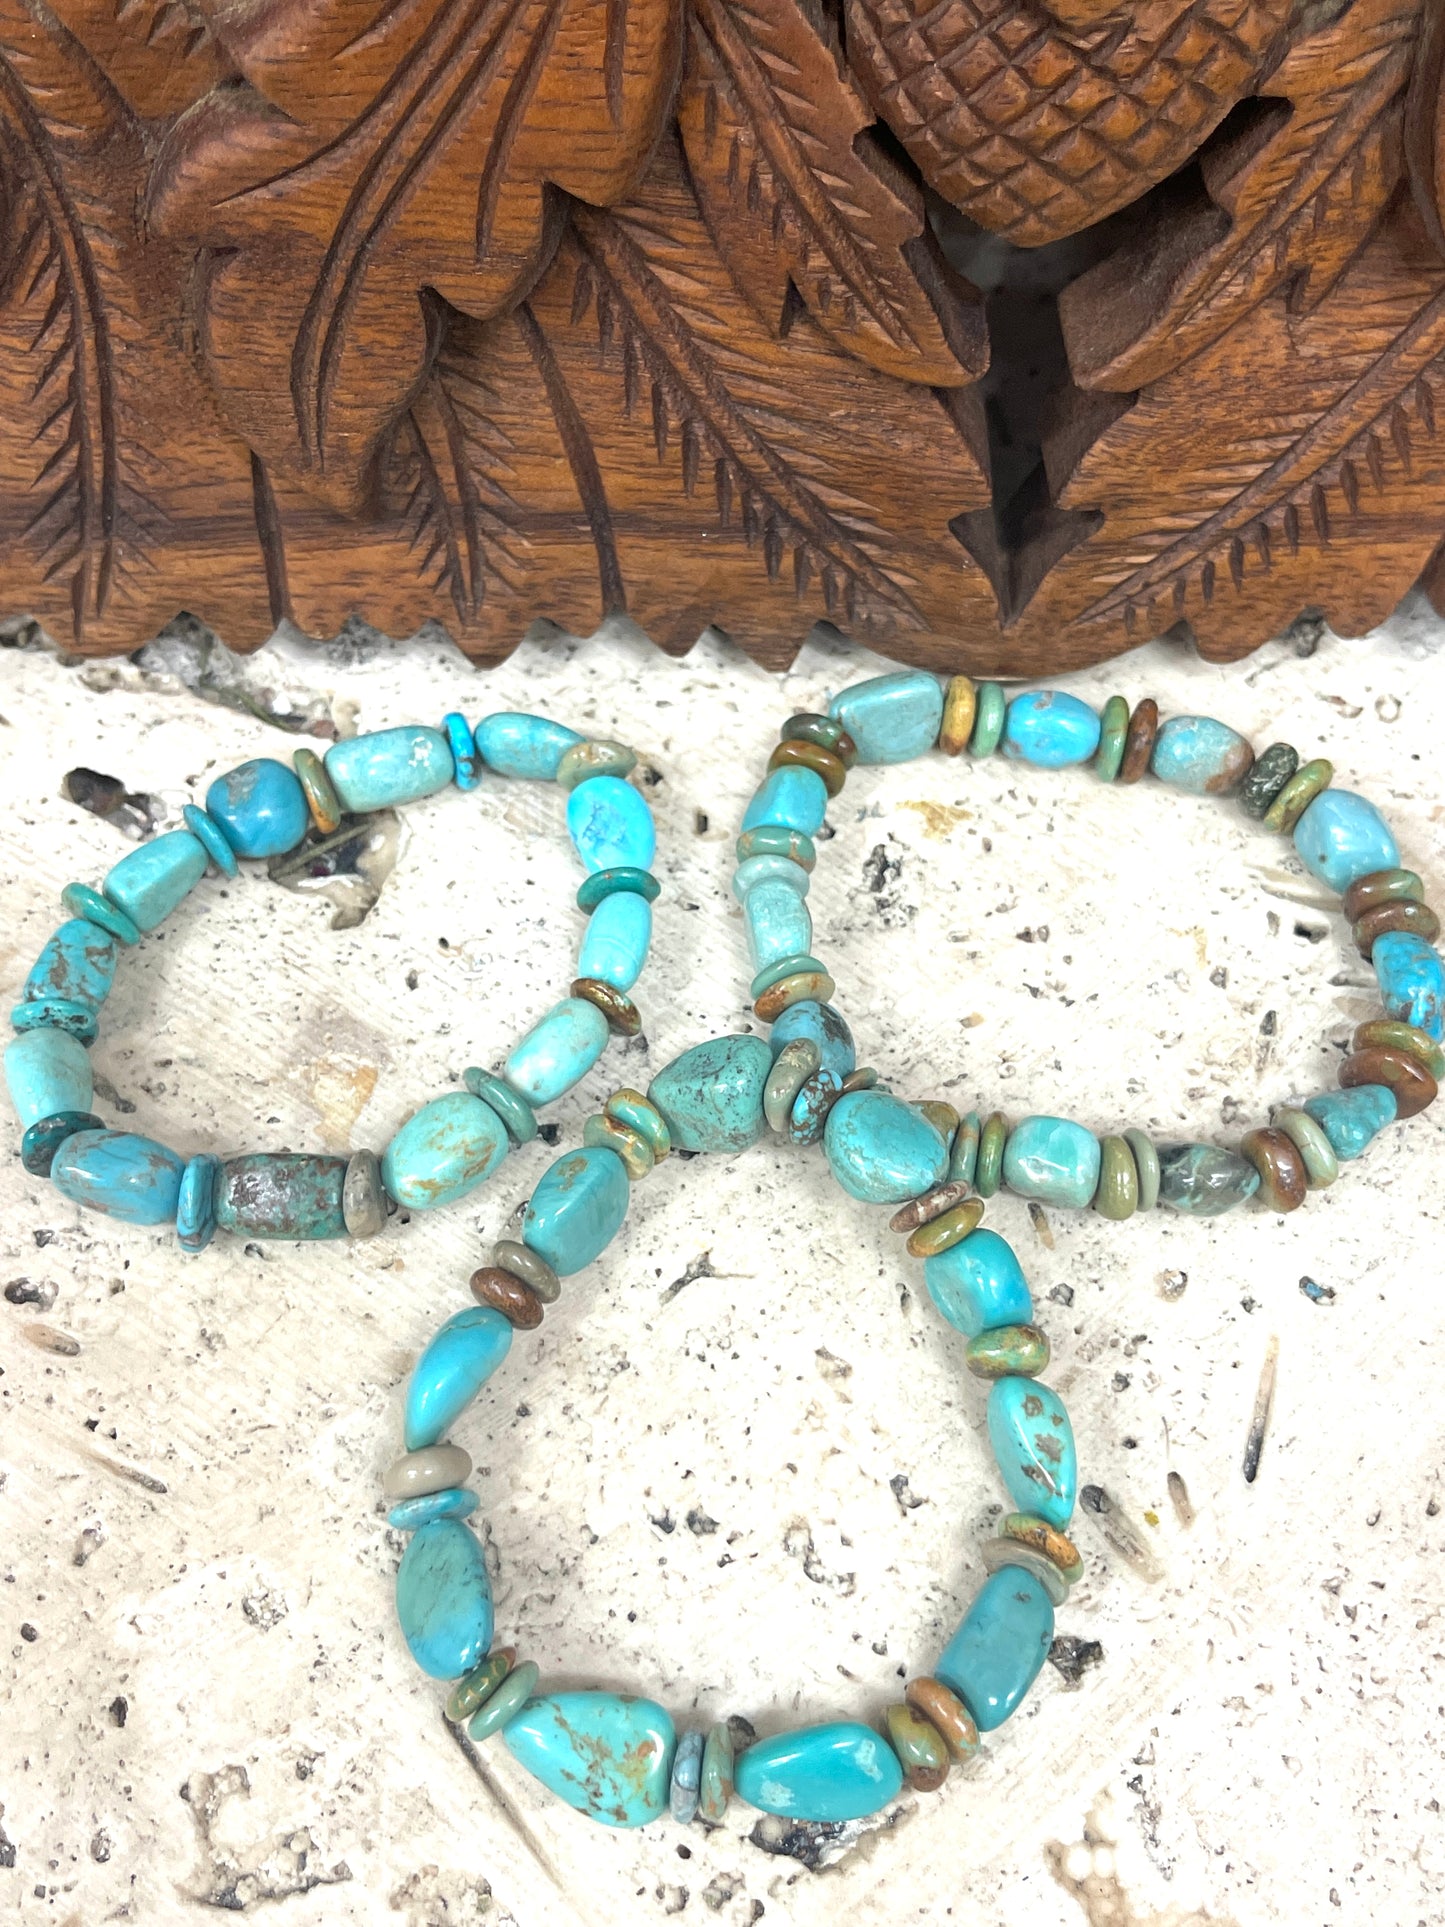 Natural Turquoise Stretchy Bracelets - 3 Styles Available